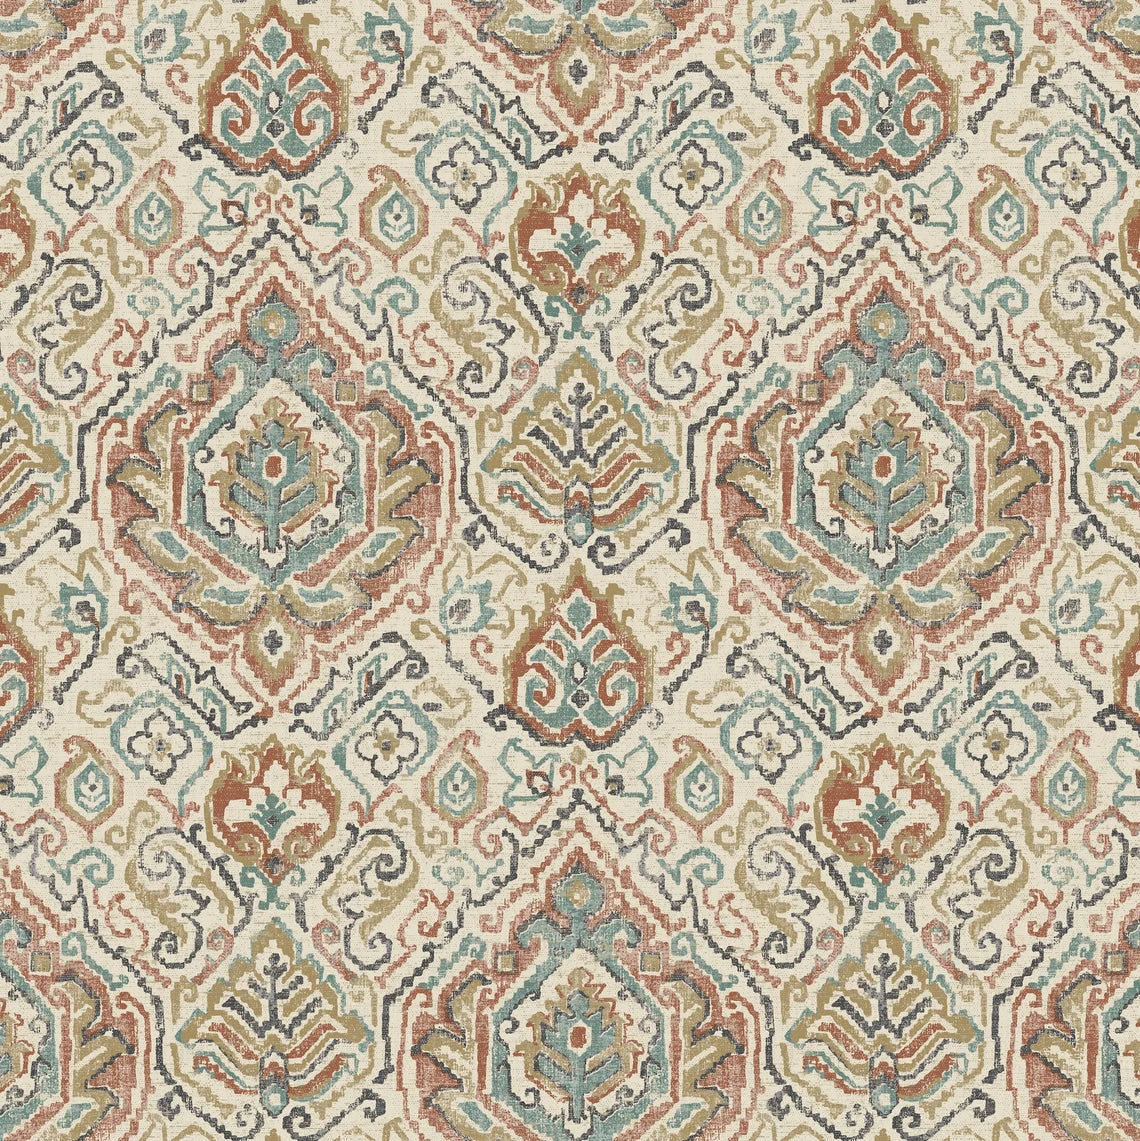 Gathered Crib Skirt in Cathell Clay Medallion Weathered Persian Rug Design- Large Scale